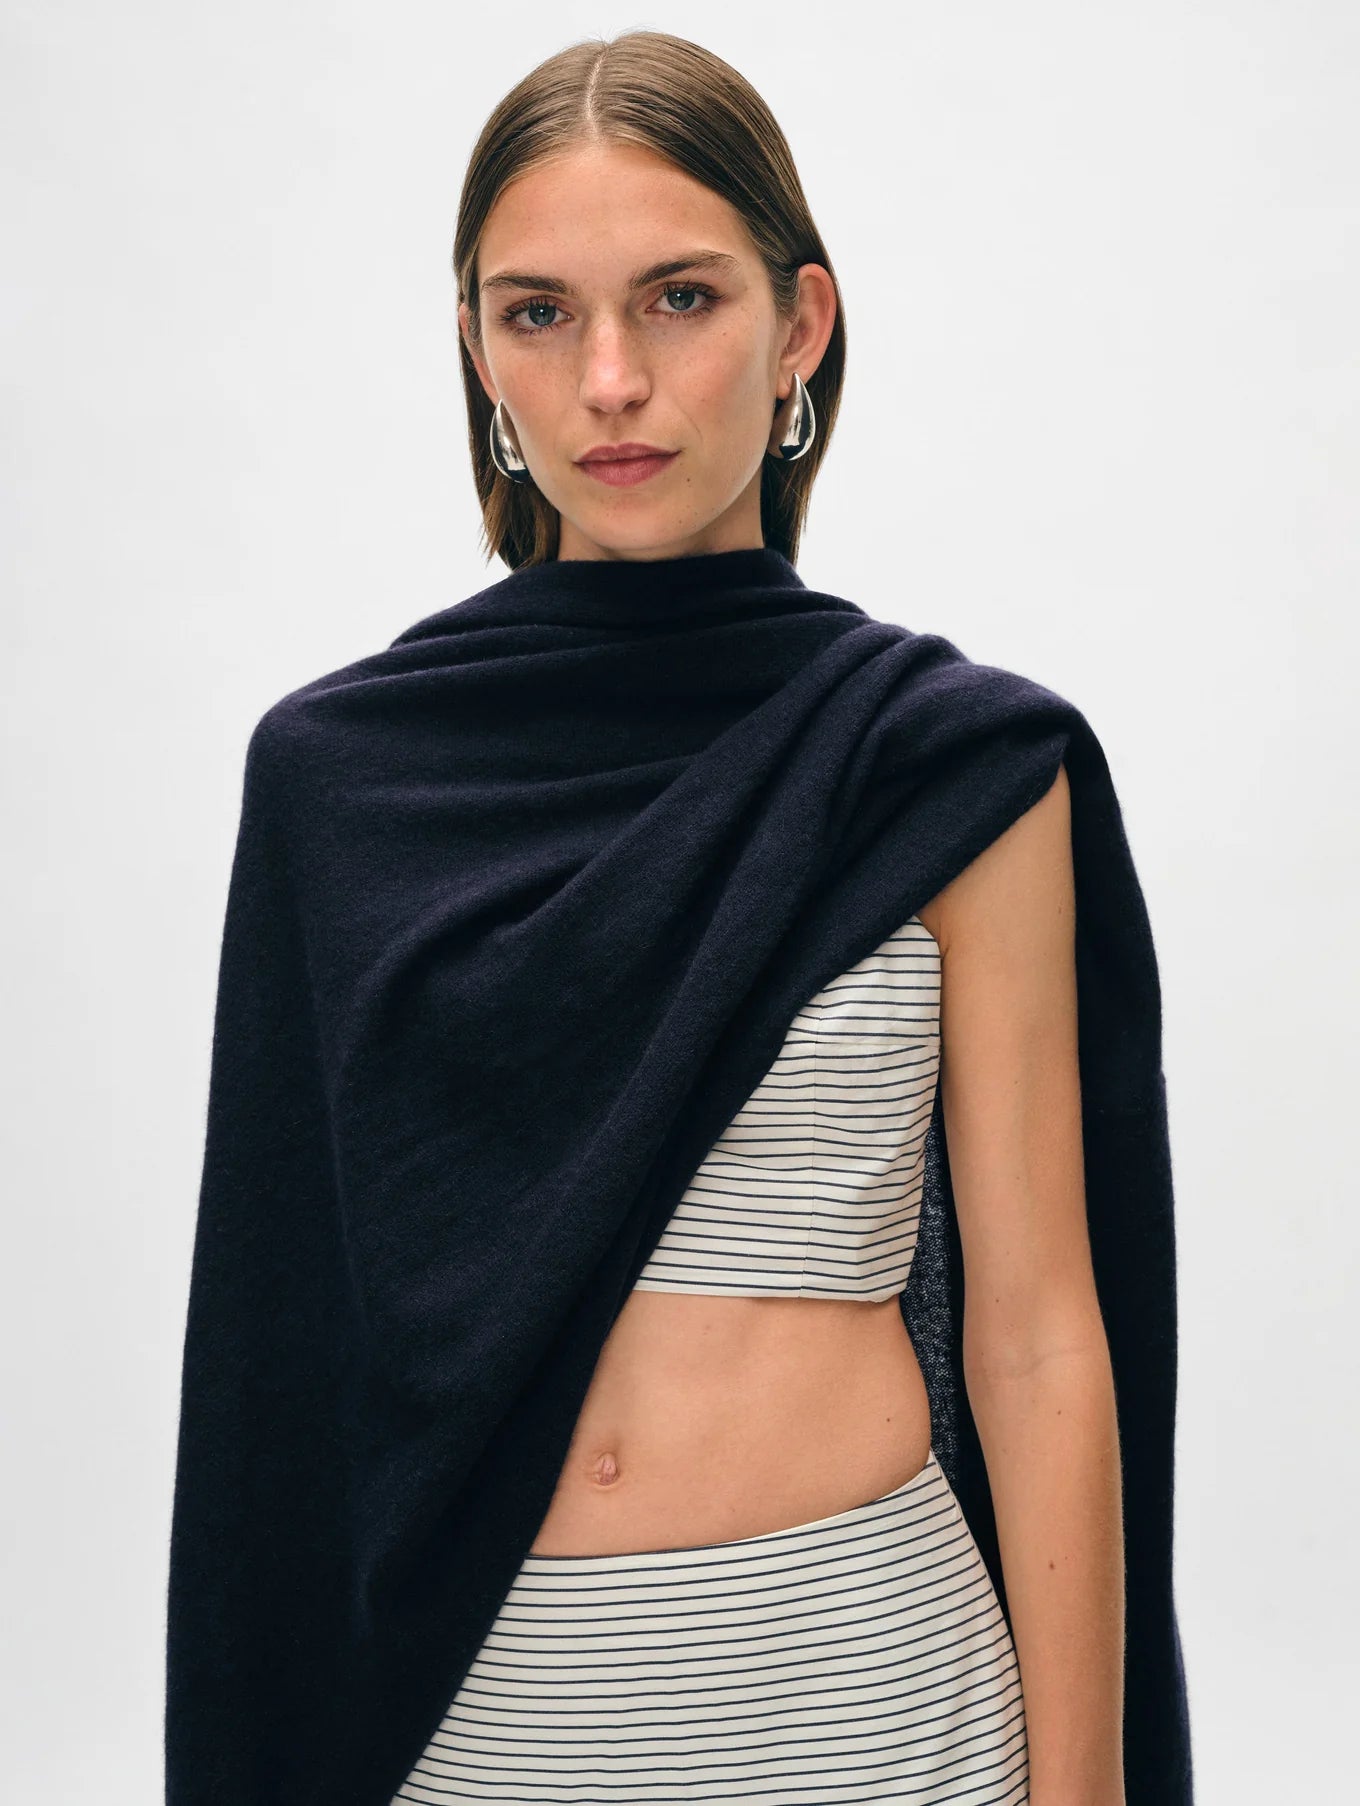 The Deep Navy Cashmere Travel Wrap by White + Warren